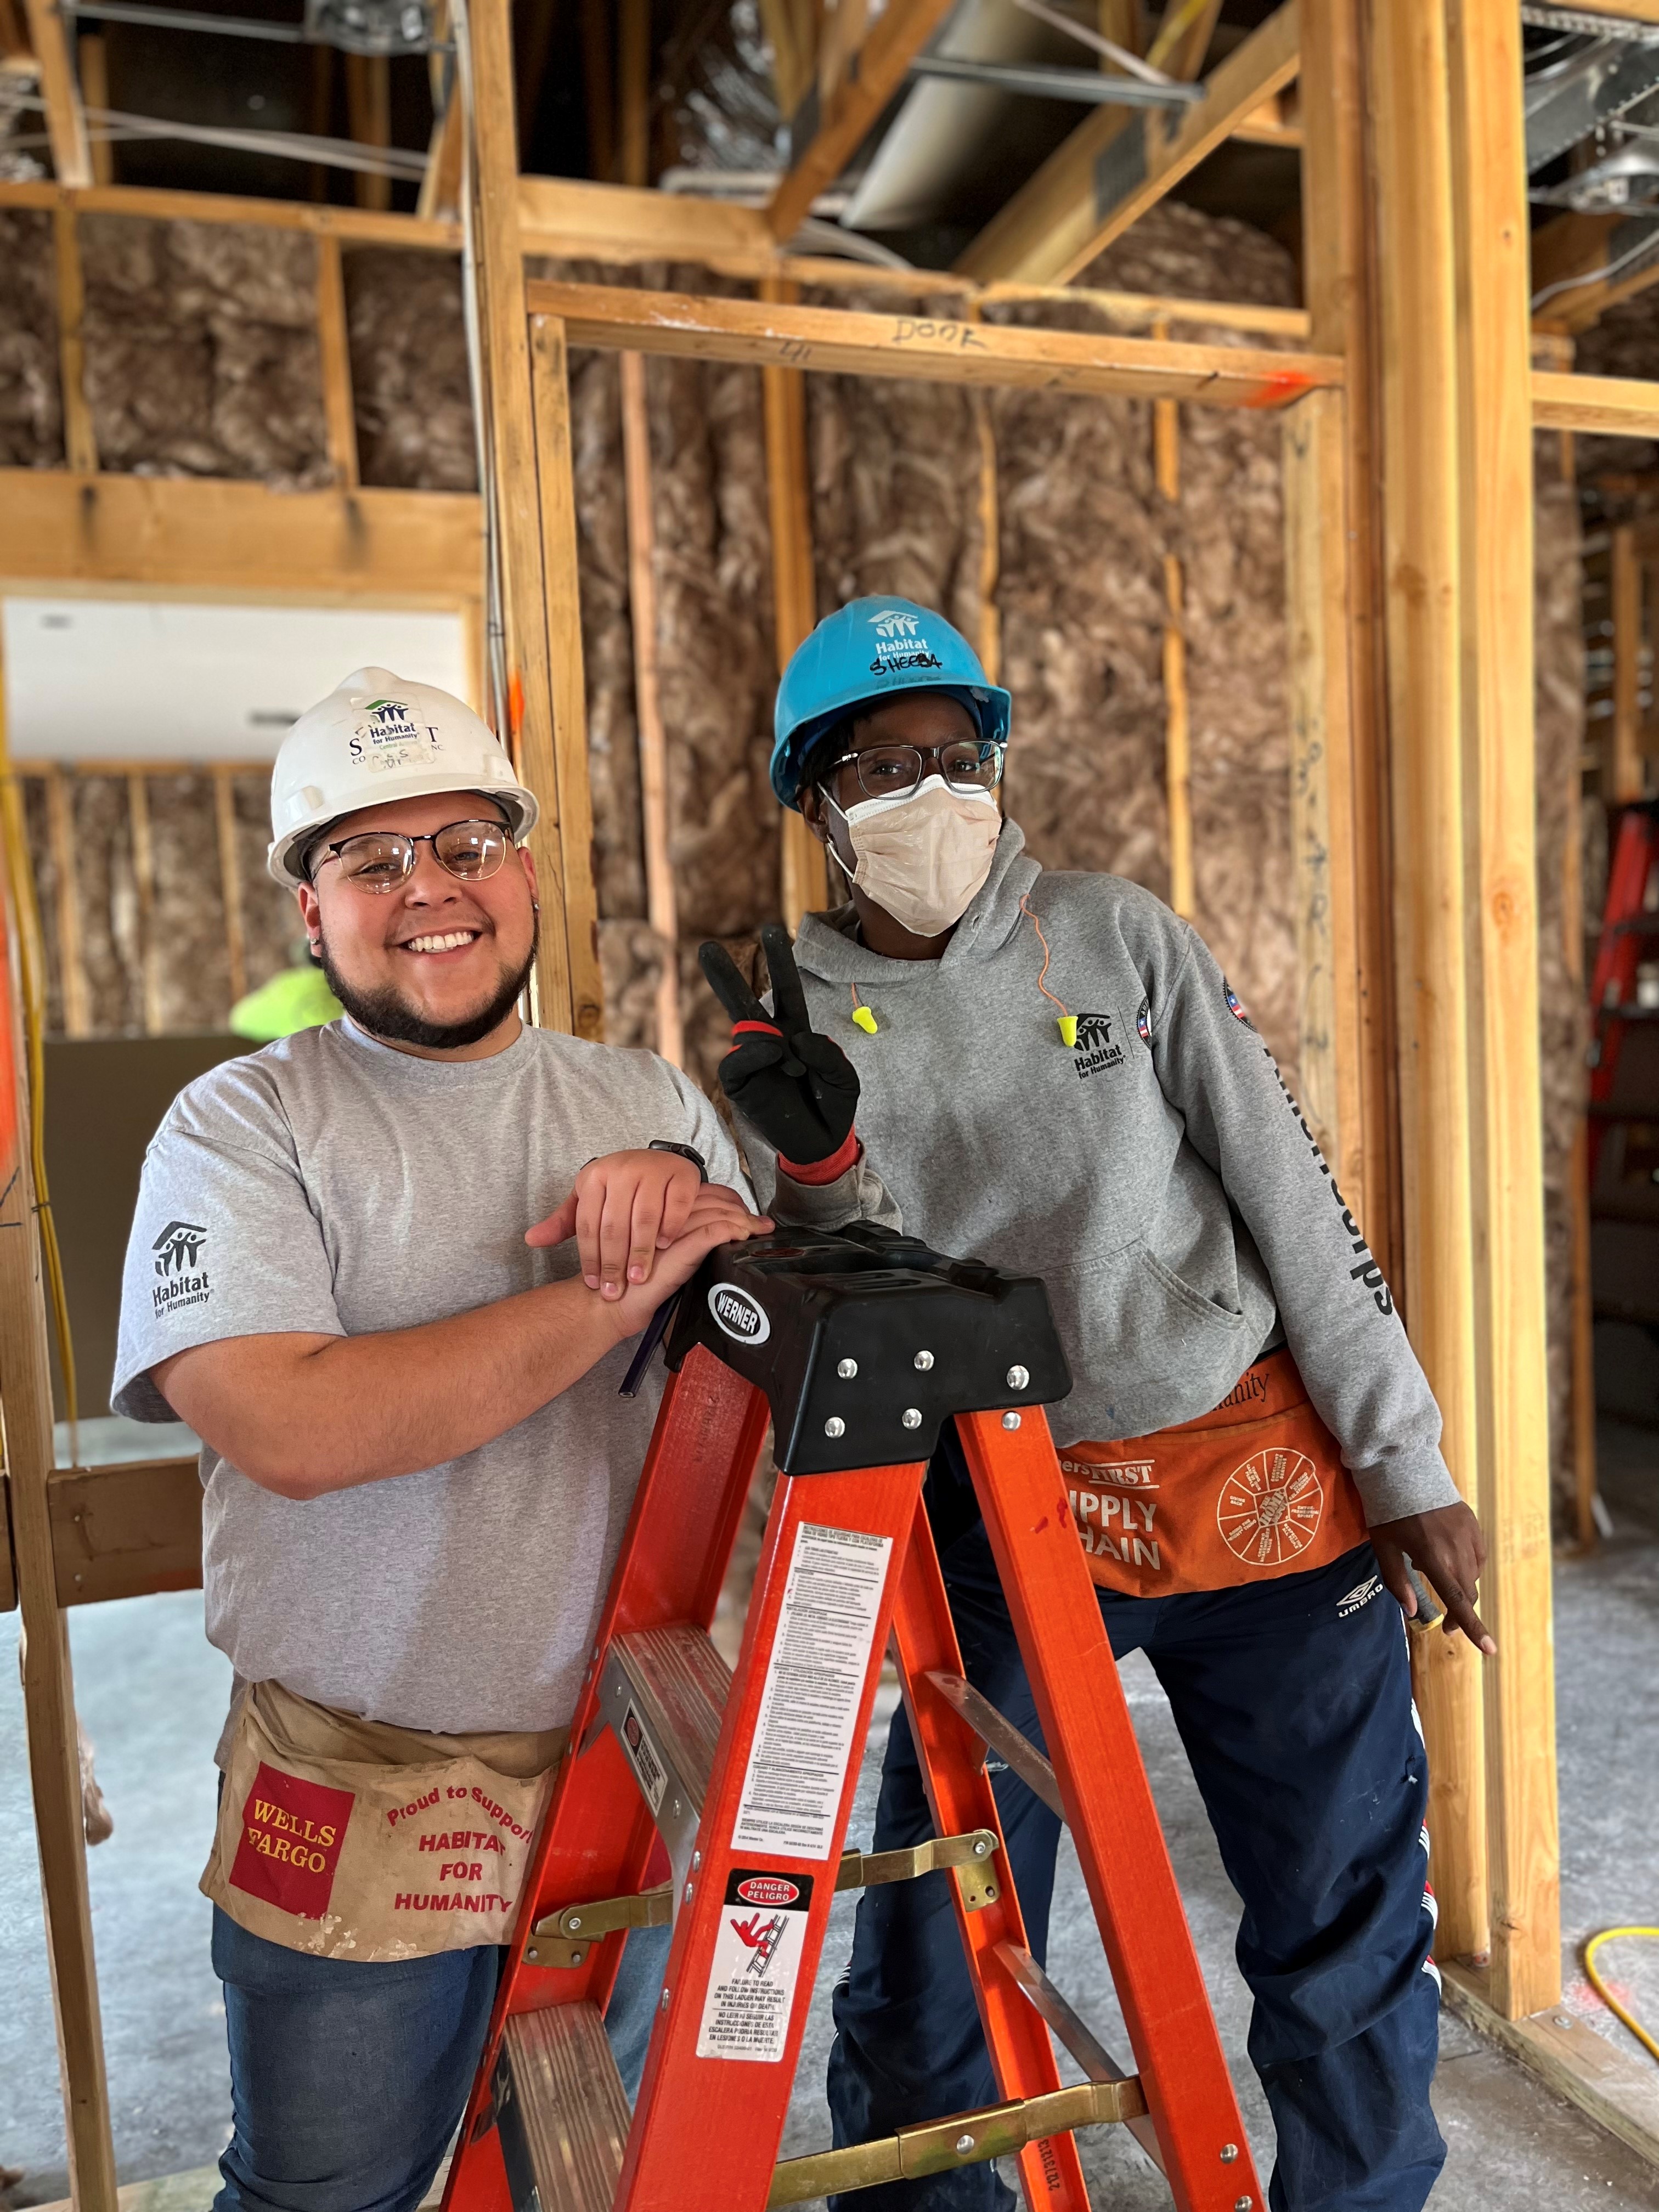 Mejia participating in a Habitat for Humanity event